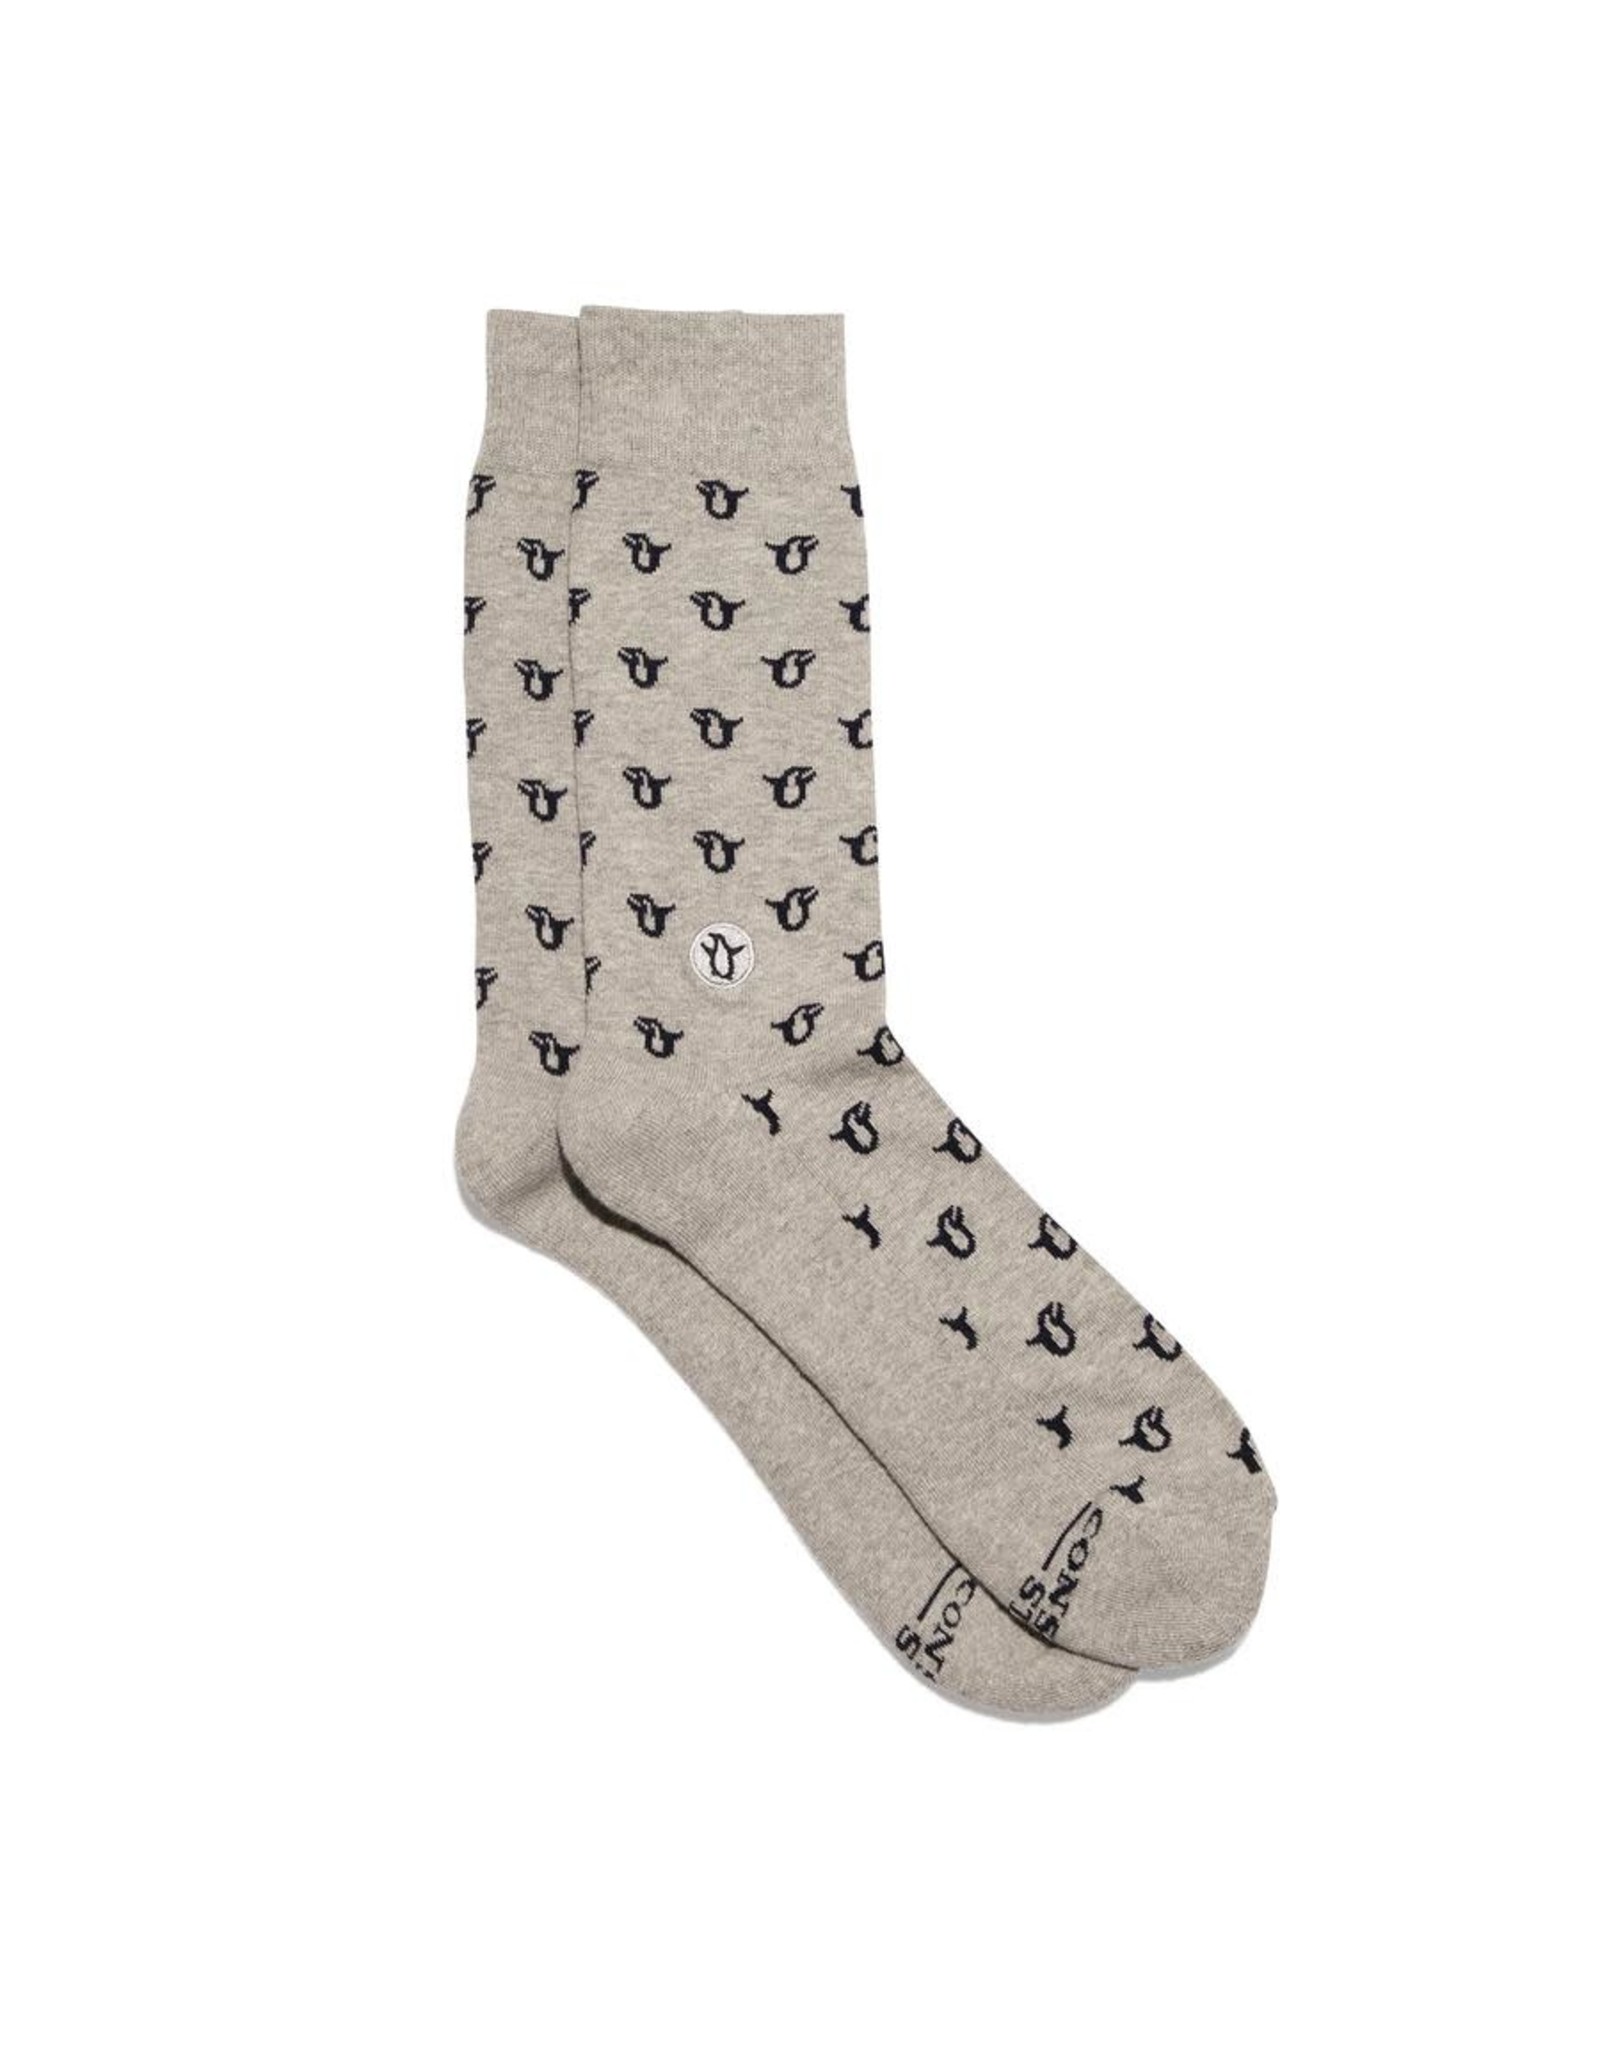 Trade roots Socks that Support Penguins & the Ocean